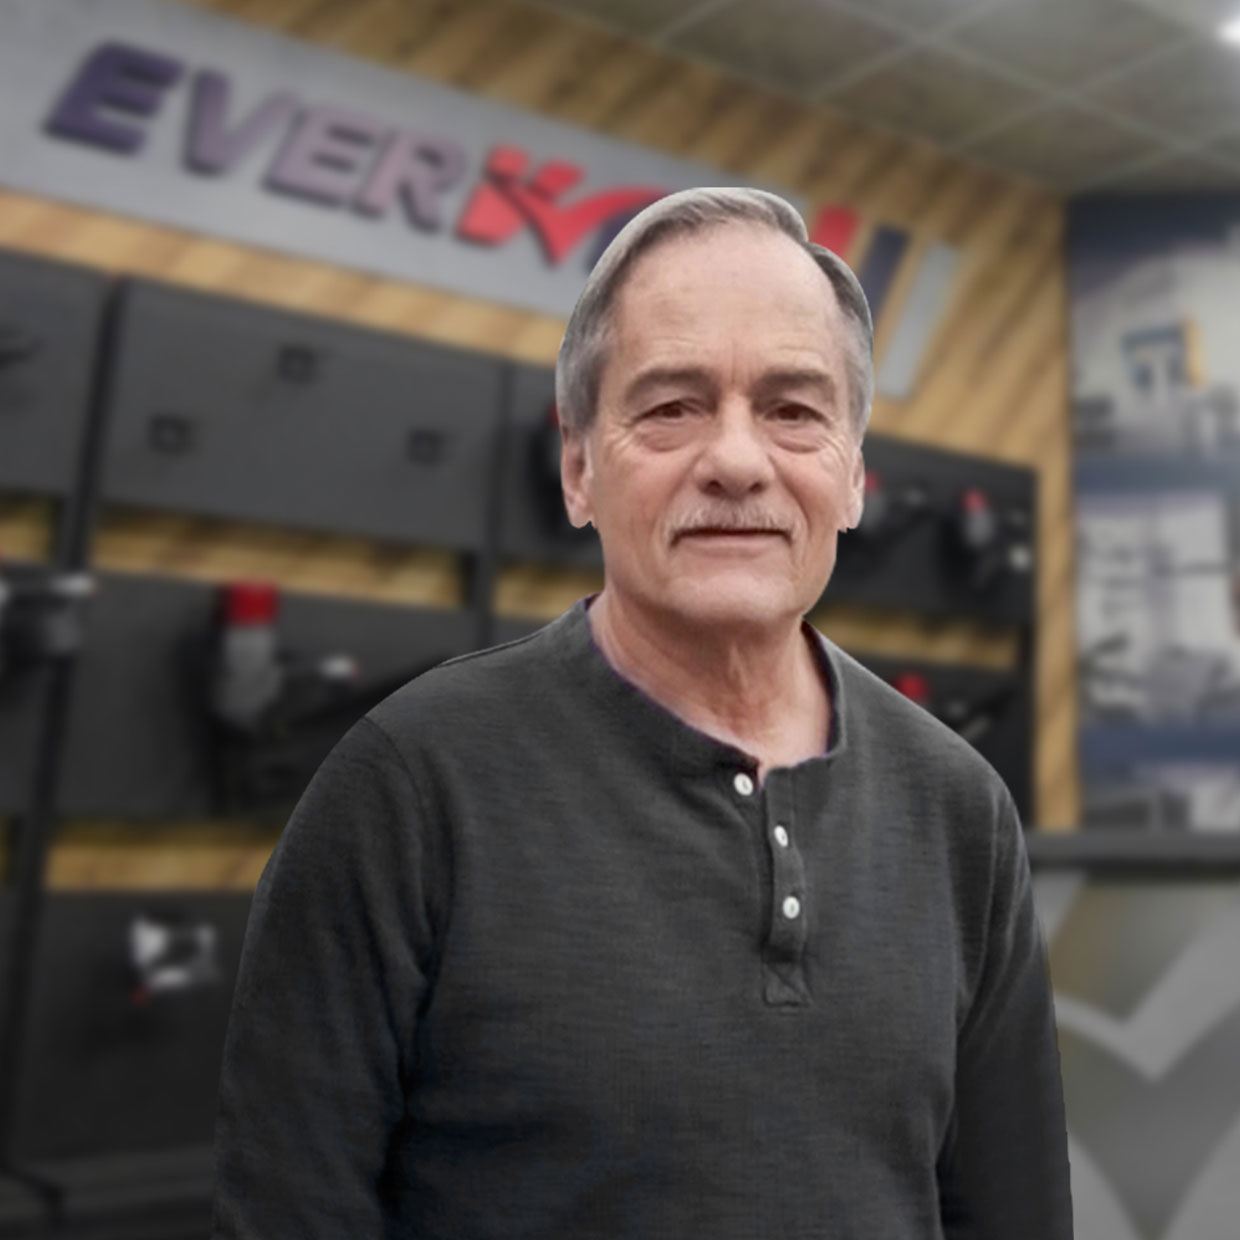 Glen Simpson, EVERWIN’s New Account Manager